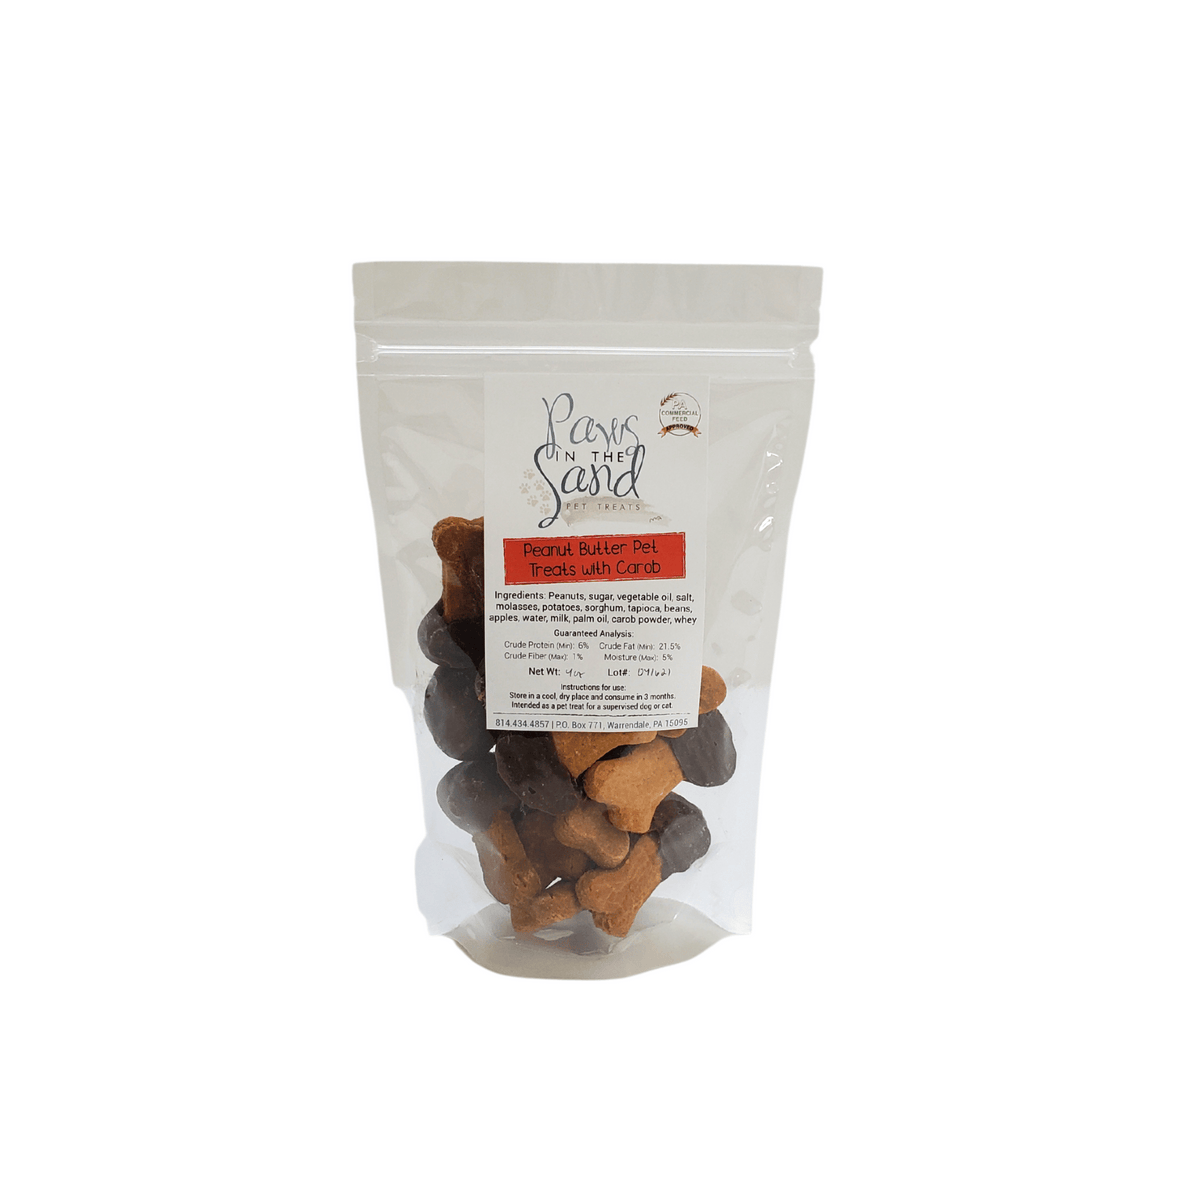 Peanut Butter and Carob Treats for Dog